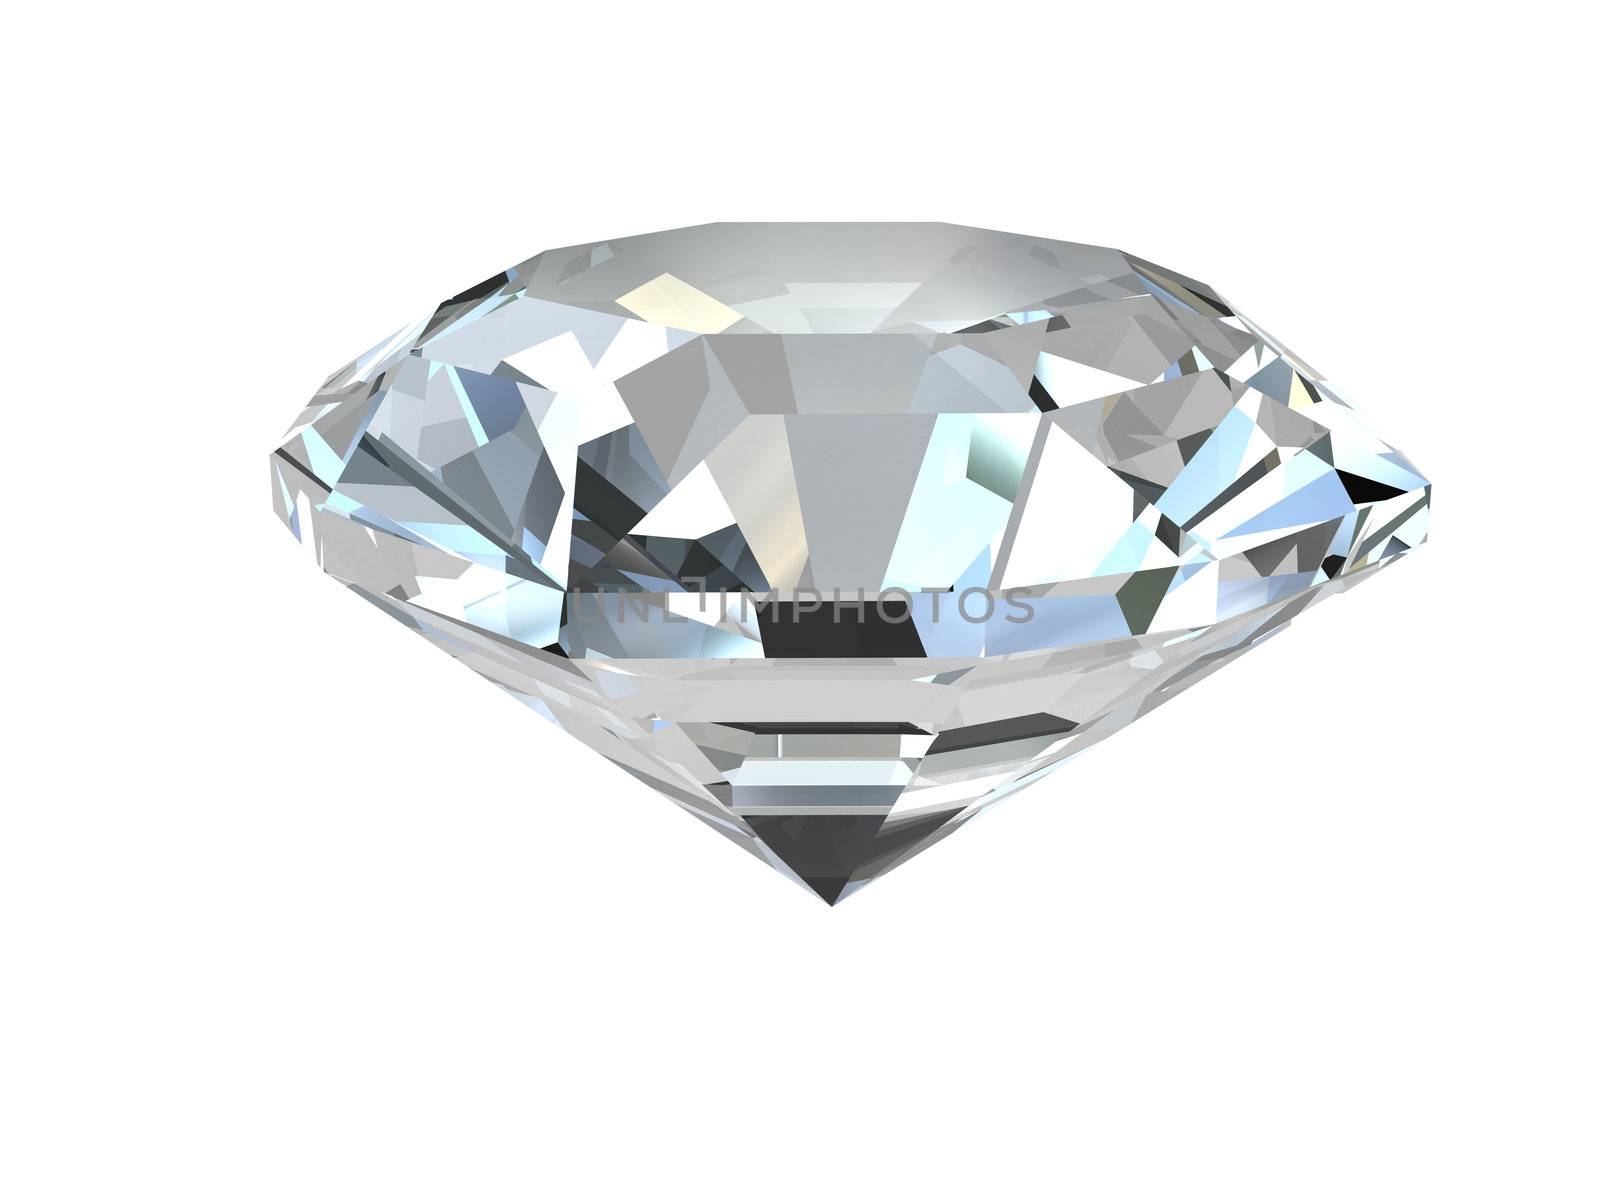 Diamond isolated on white background. High resolution 3D render